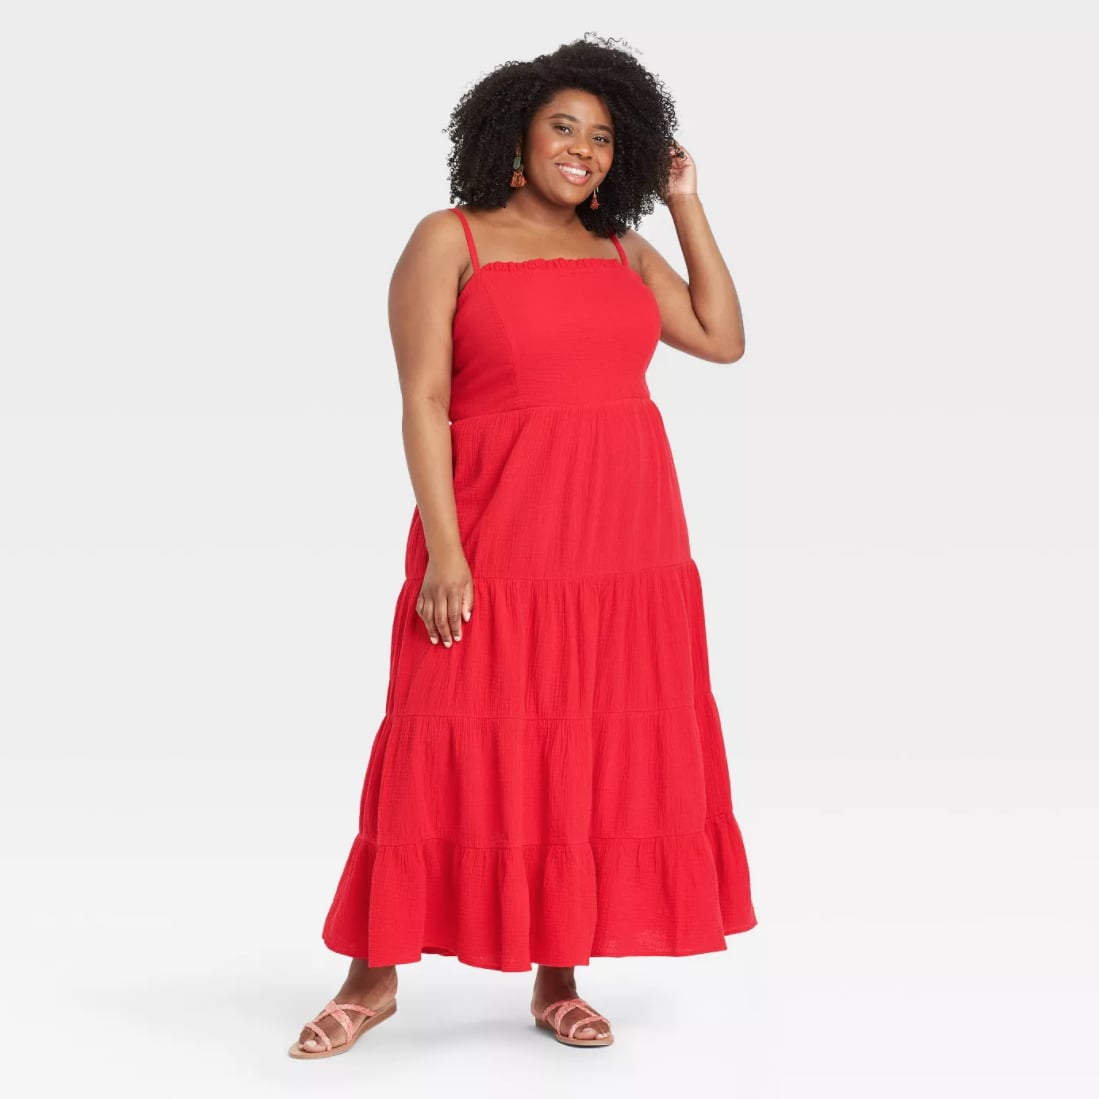 Knox Rose Sleeveless Tiered Dress in Red